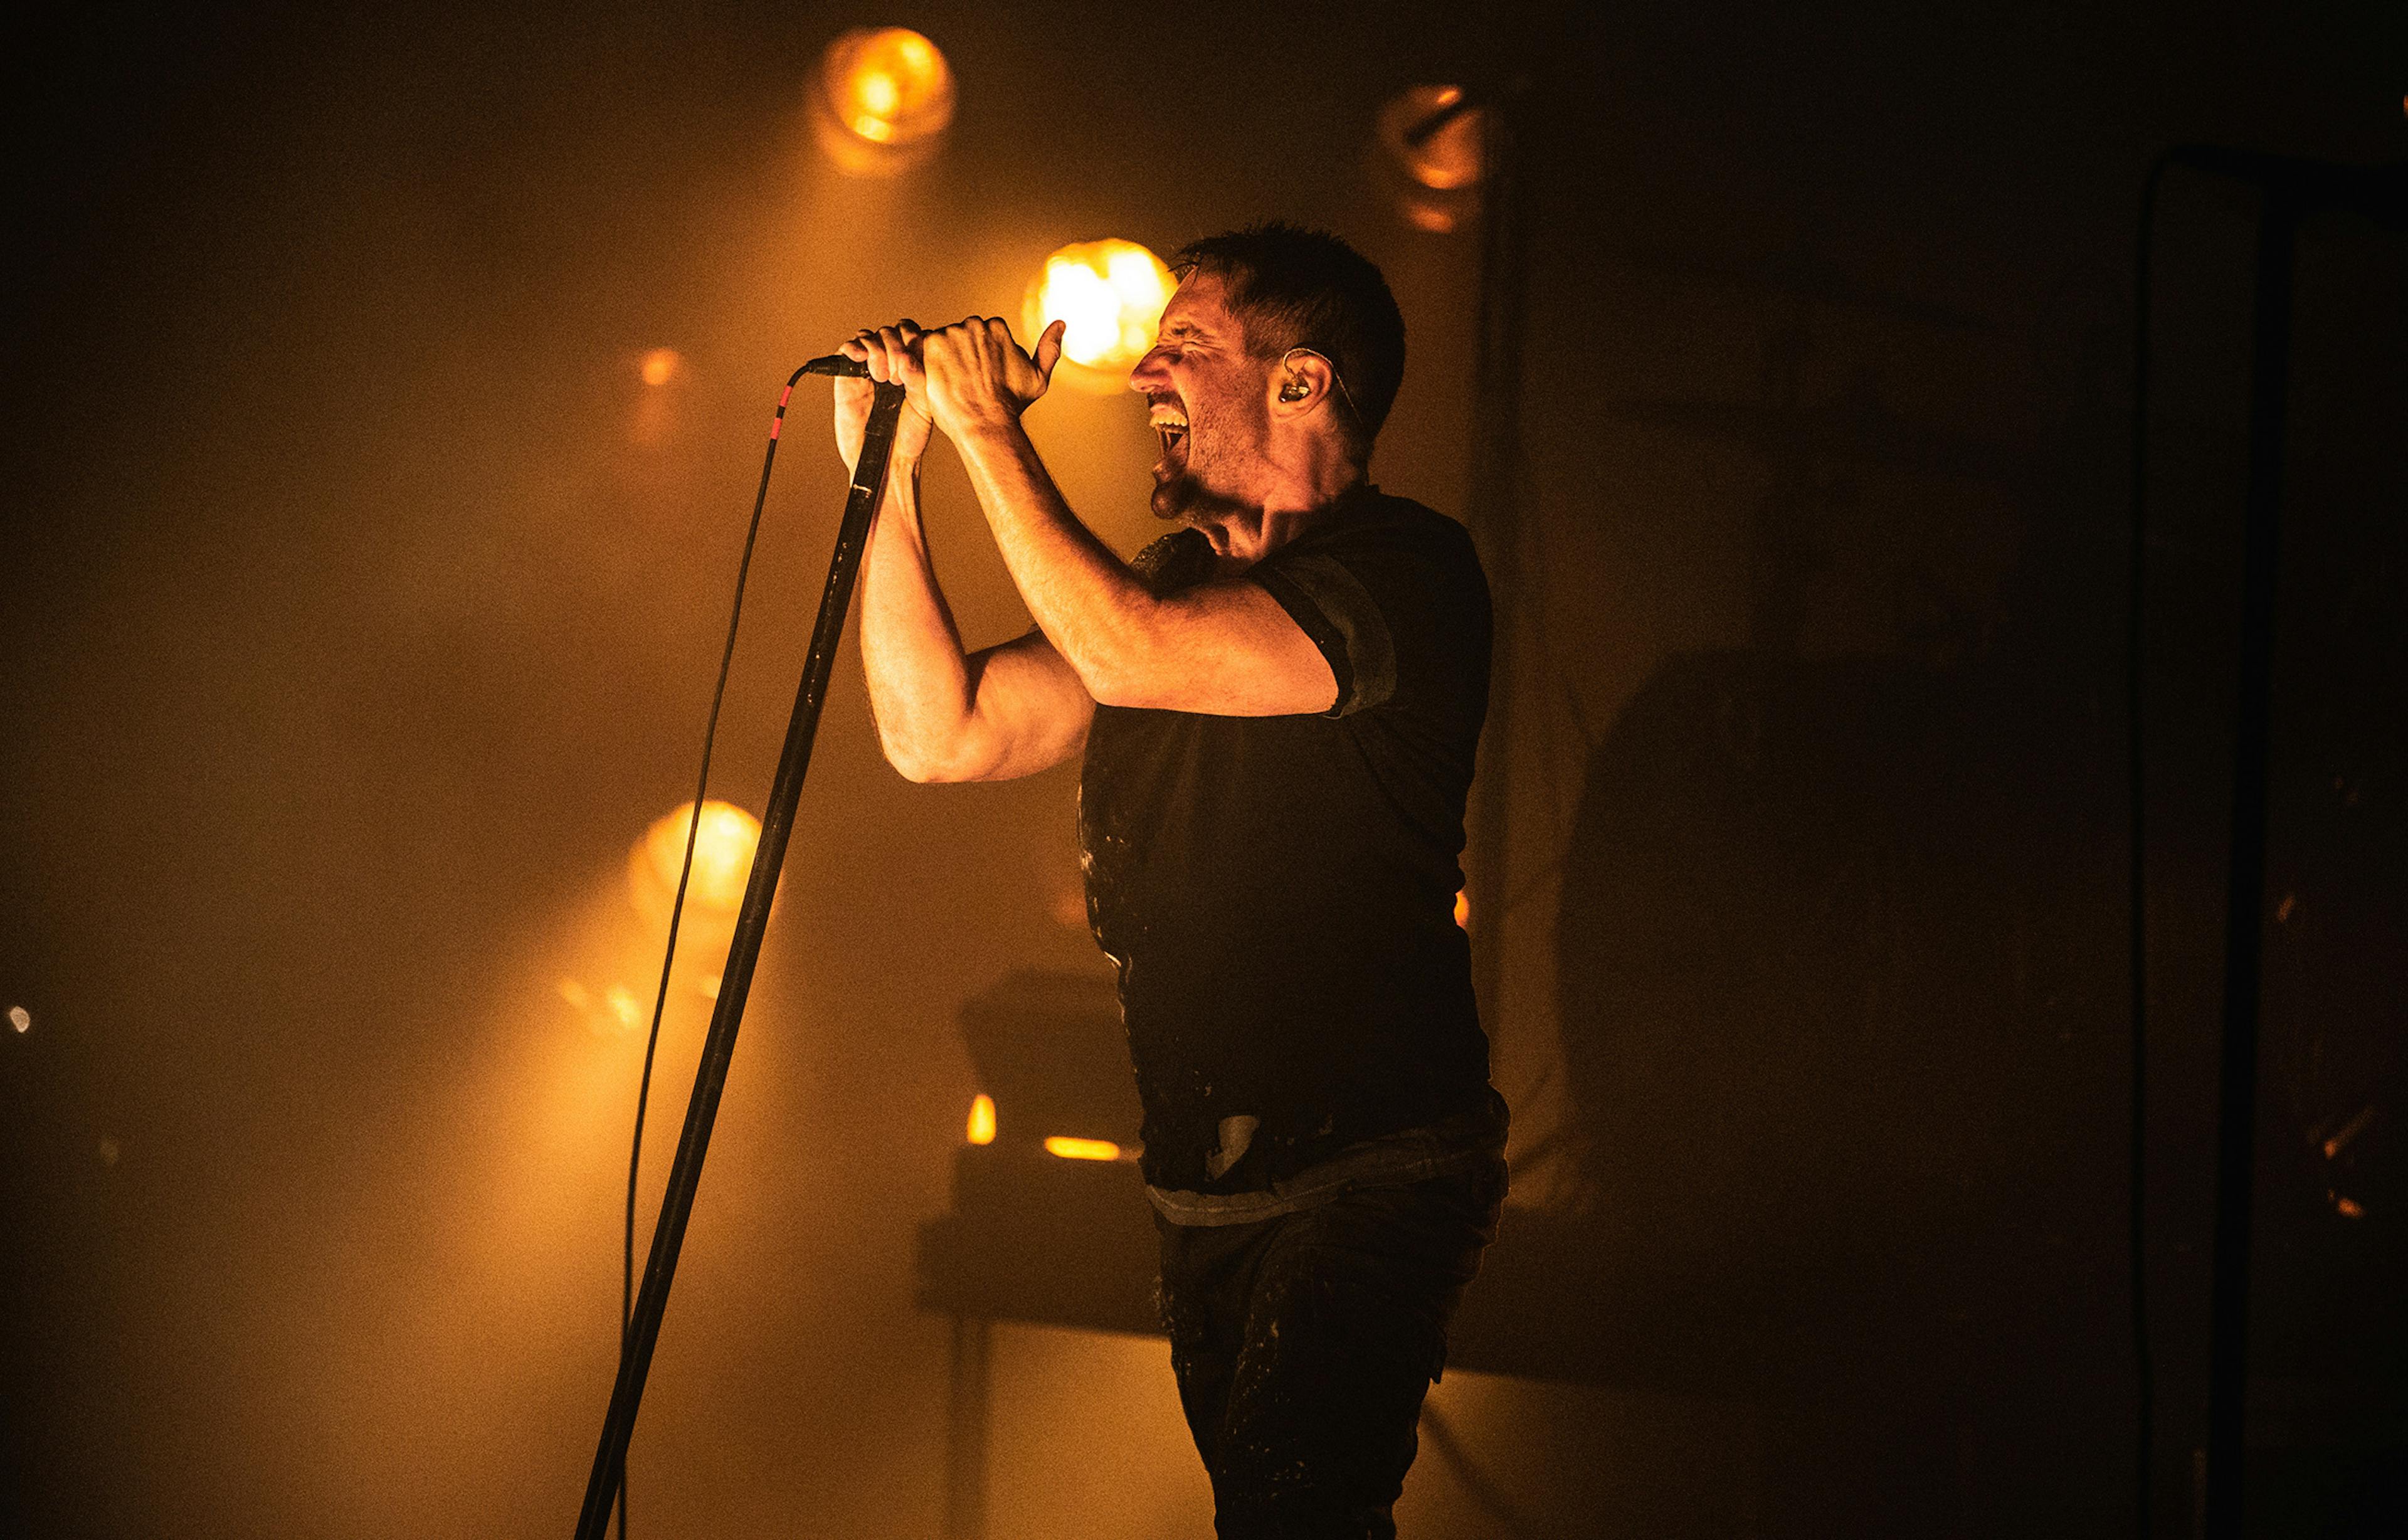 Trent Reznor's Lockdown Plan Is To "Deep Dive Into New NIN Material"